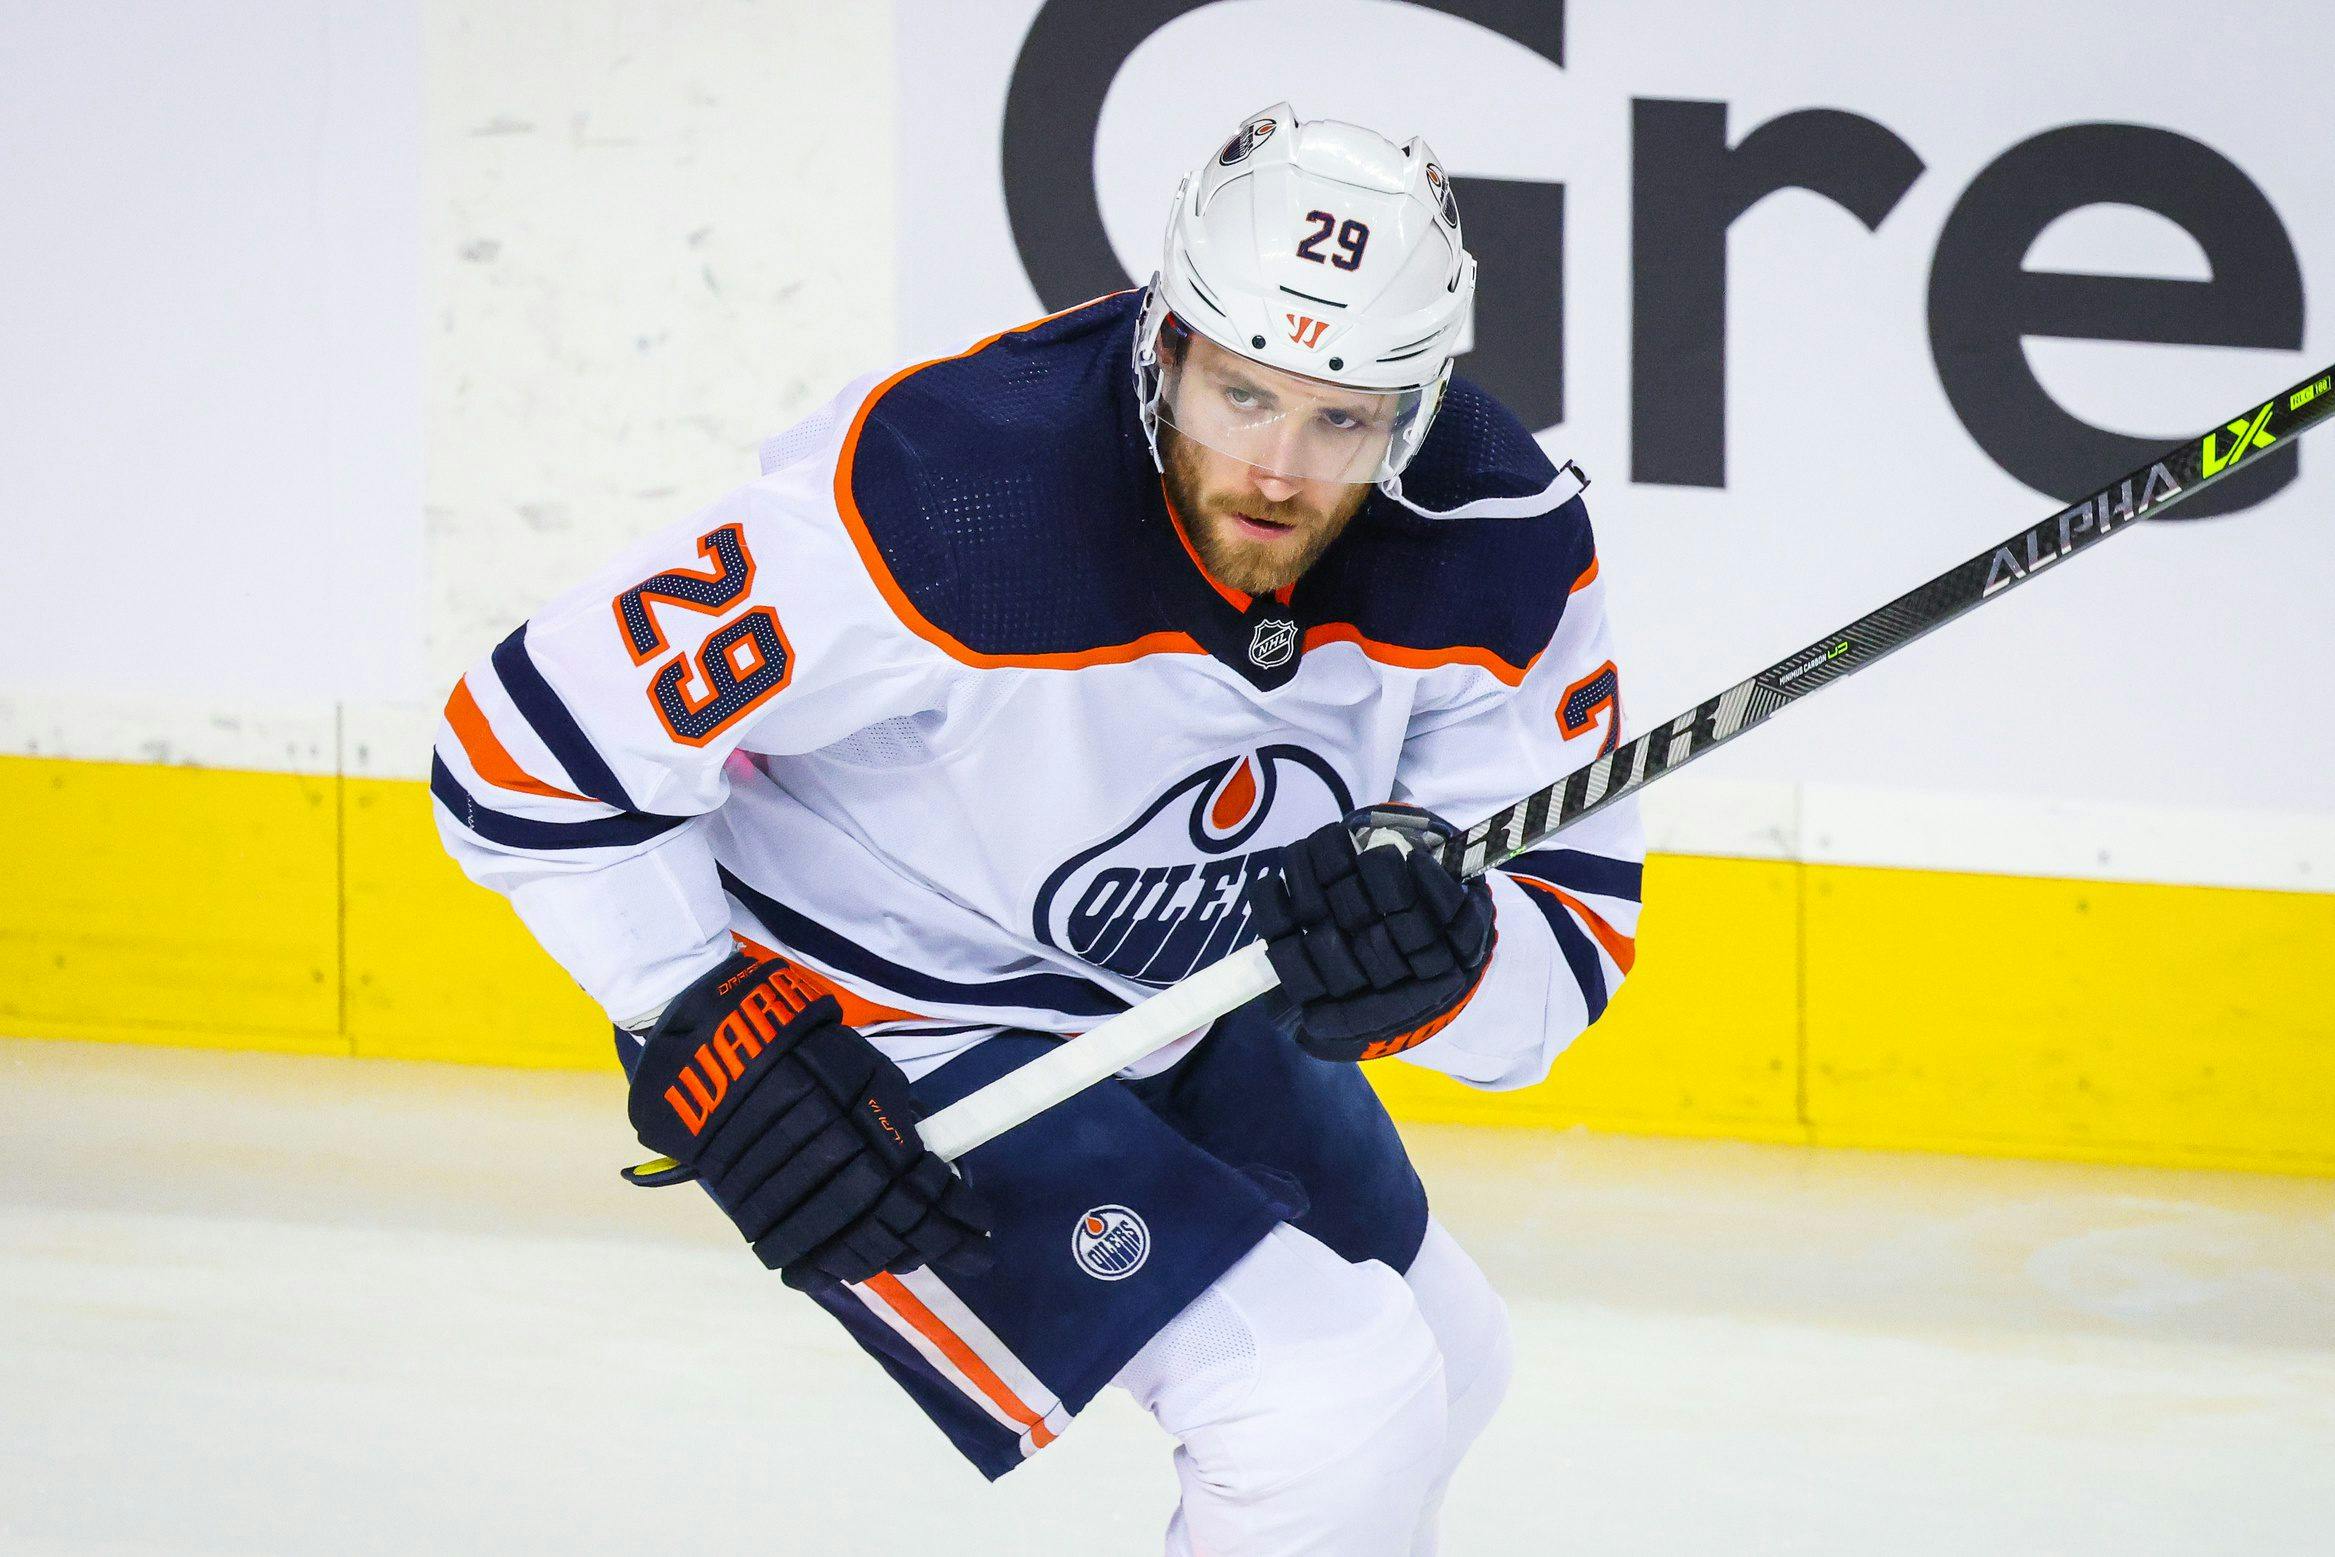 Leon Draisaitl fined $5,000 for illegal trip during last night’s game